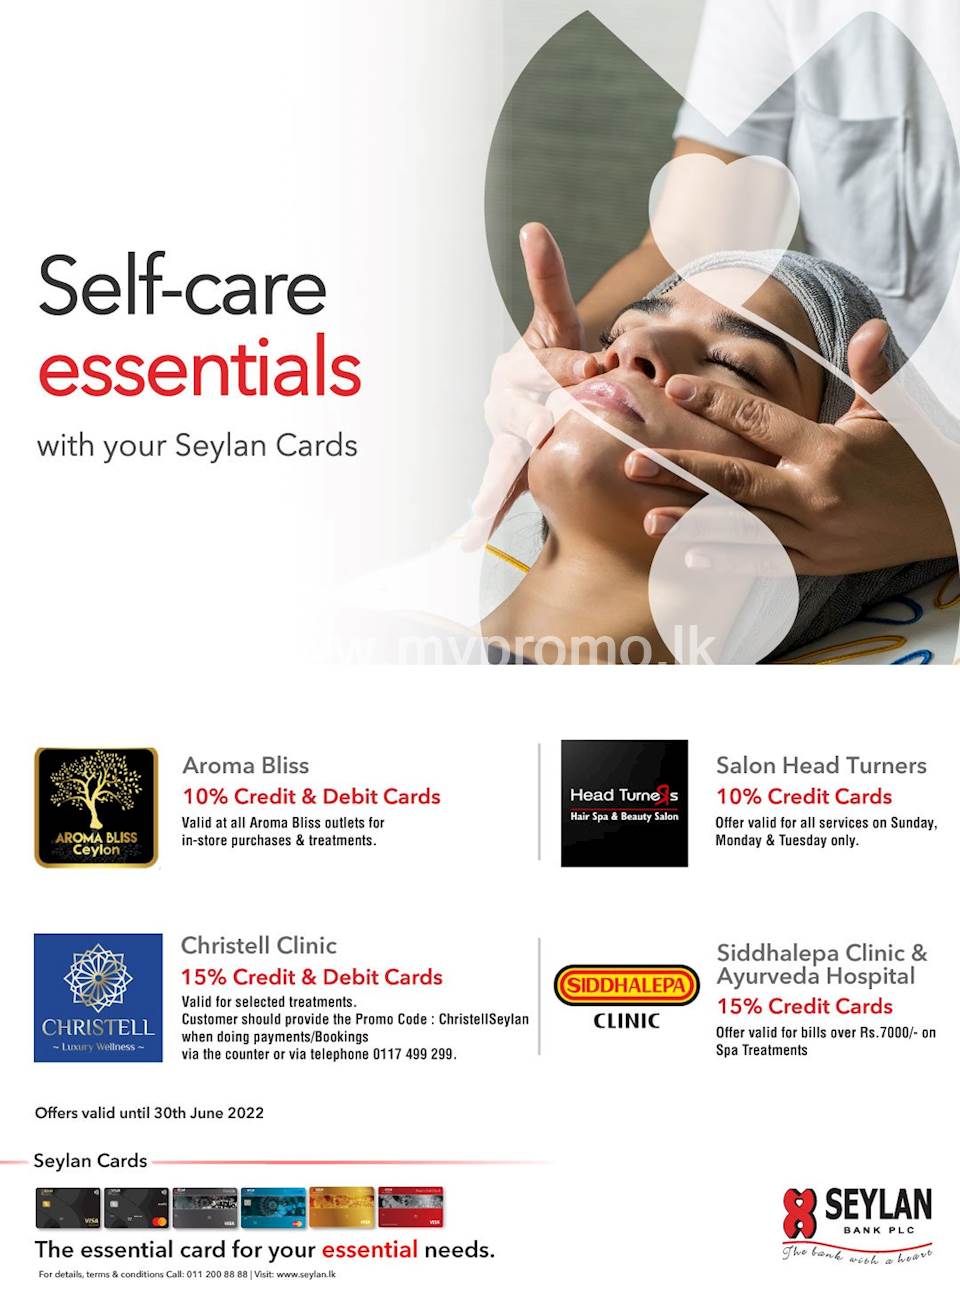 Enjoy savings on self care essentials with your Seylan Cards